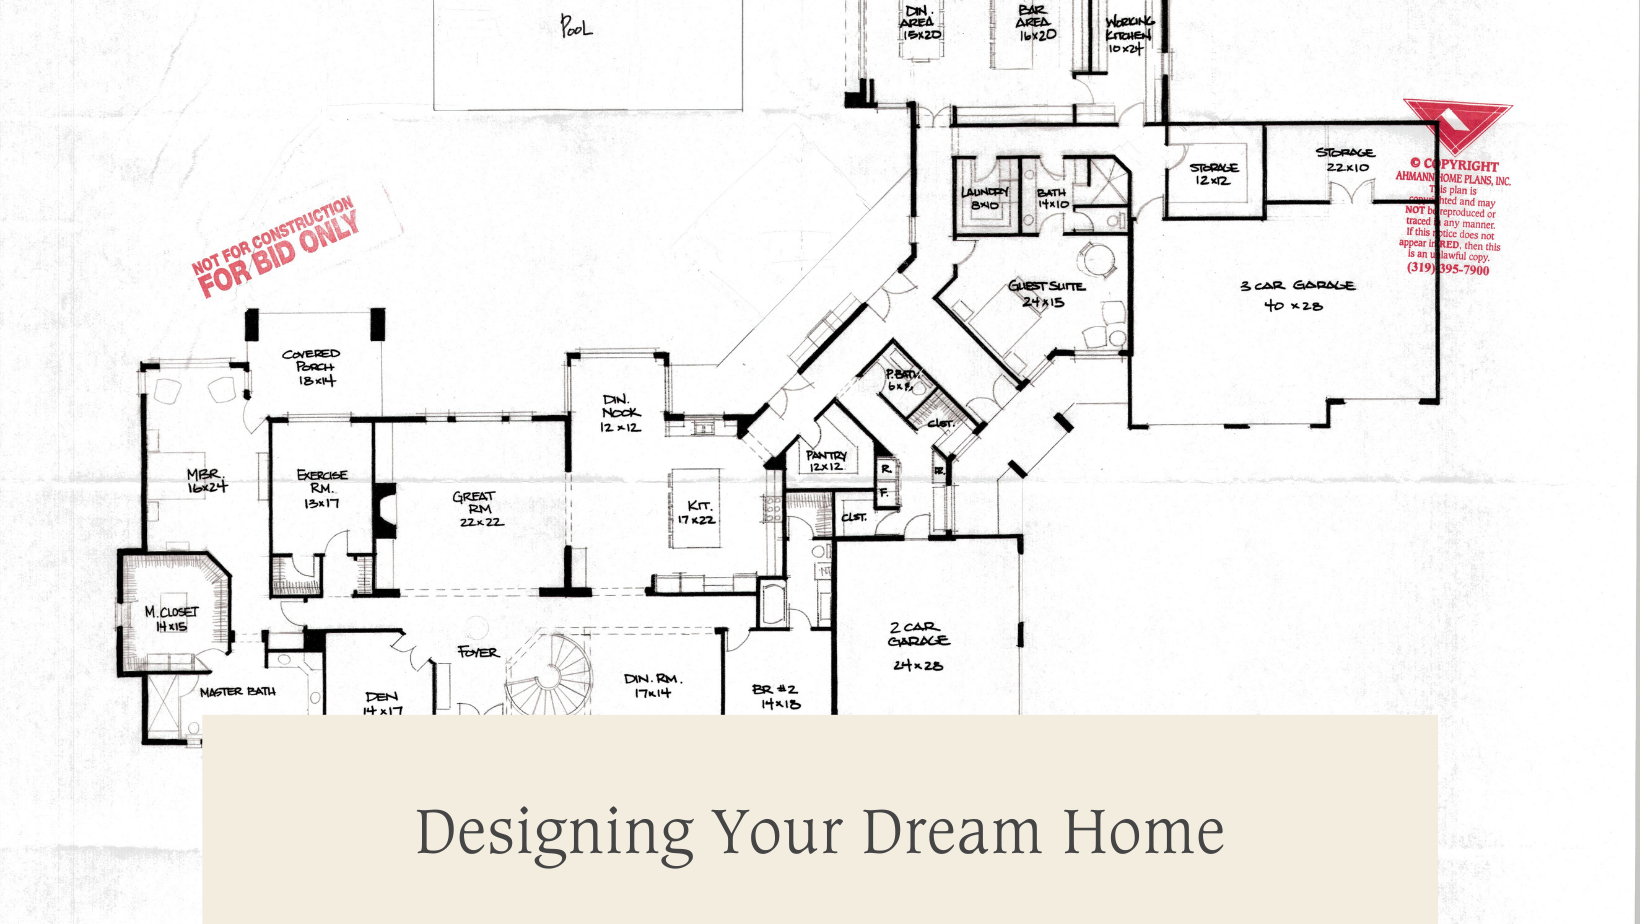 Designing your dream home